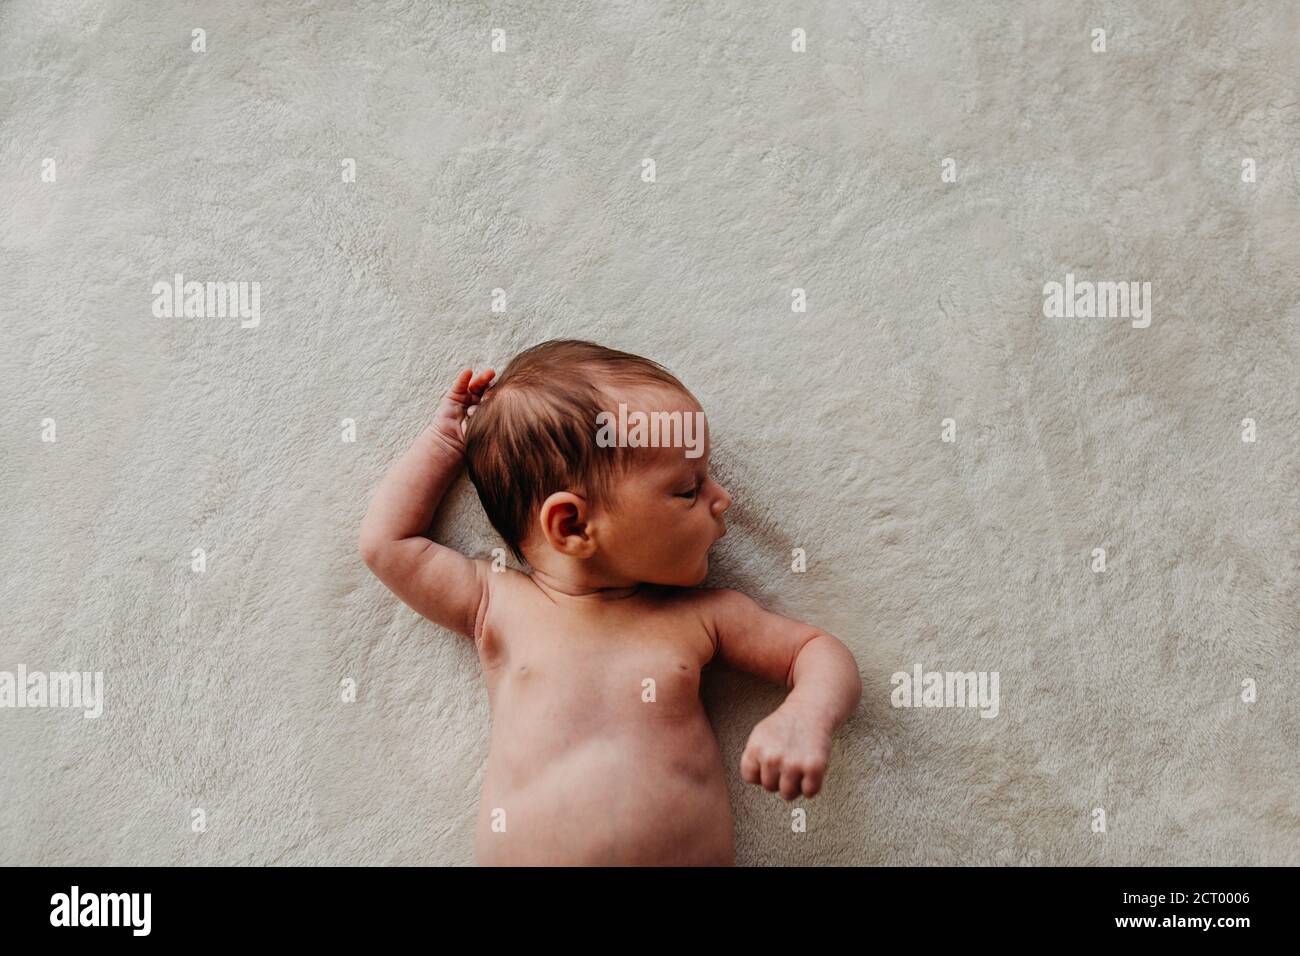 newborn baby arms, belly and head laying on a white blanket Stock Photo